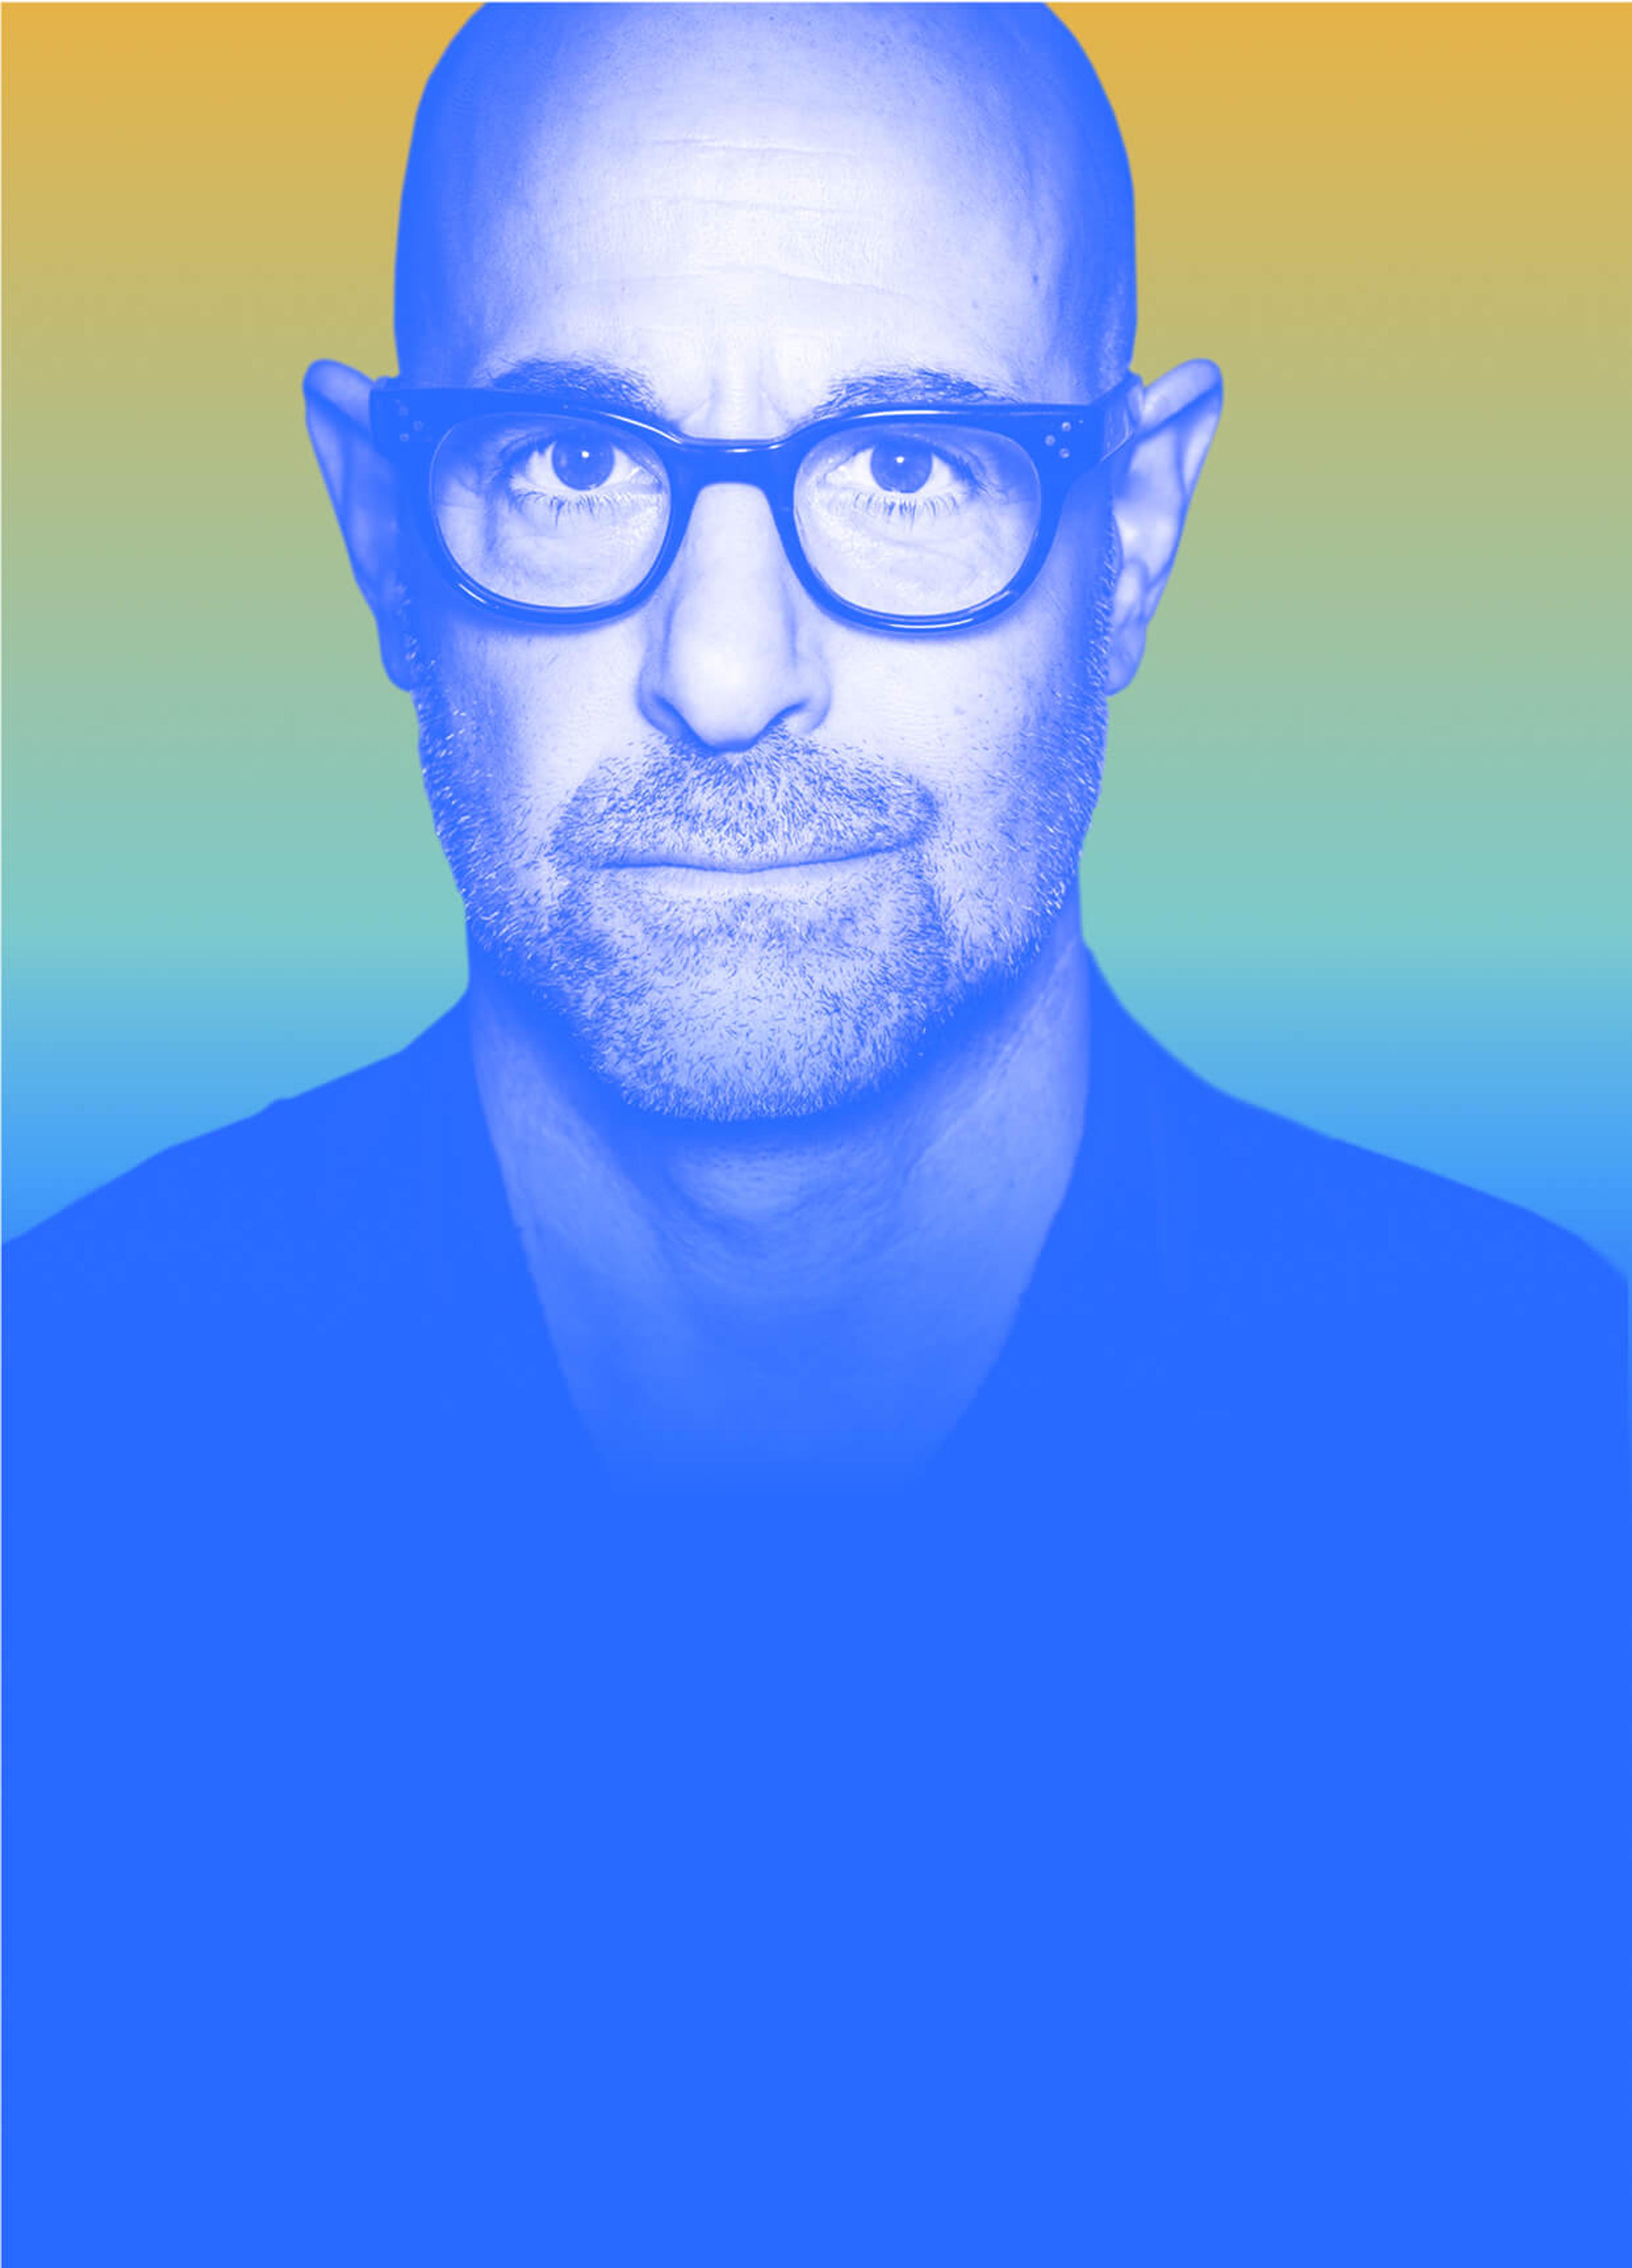 Stanley Tucci on Taste, life's journeys, and wooing through food.